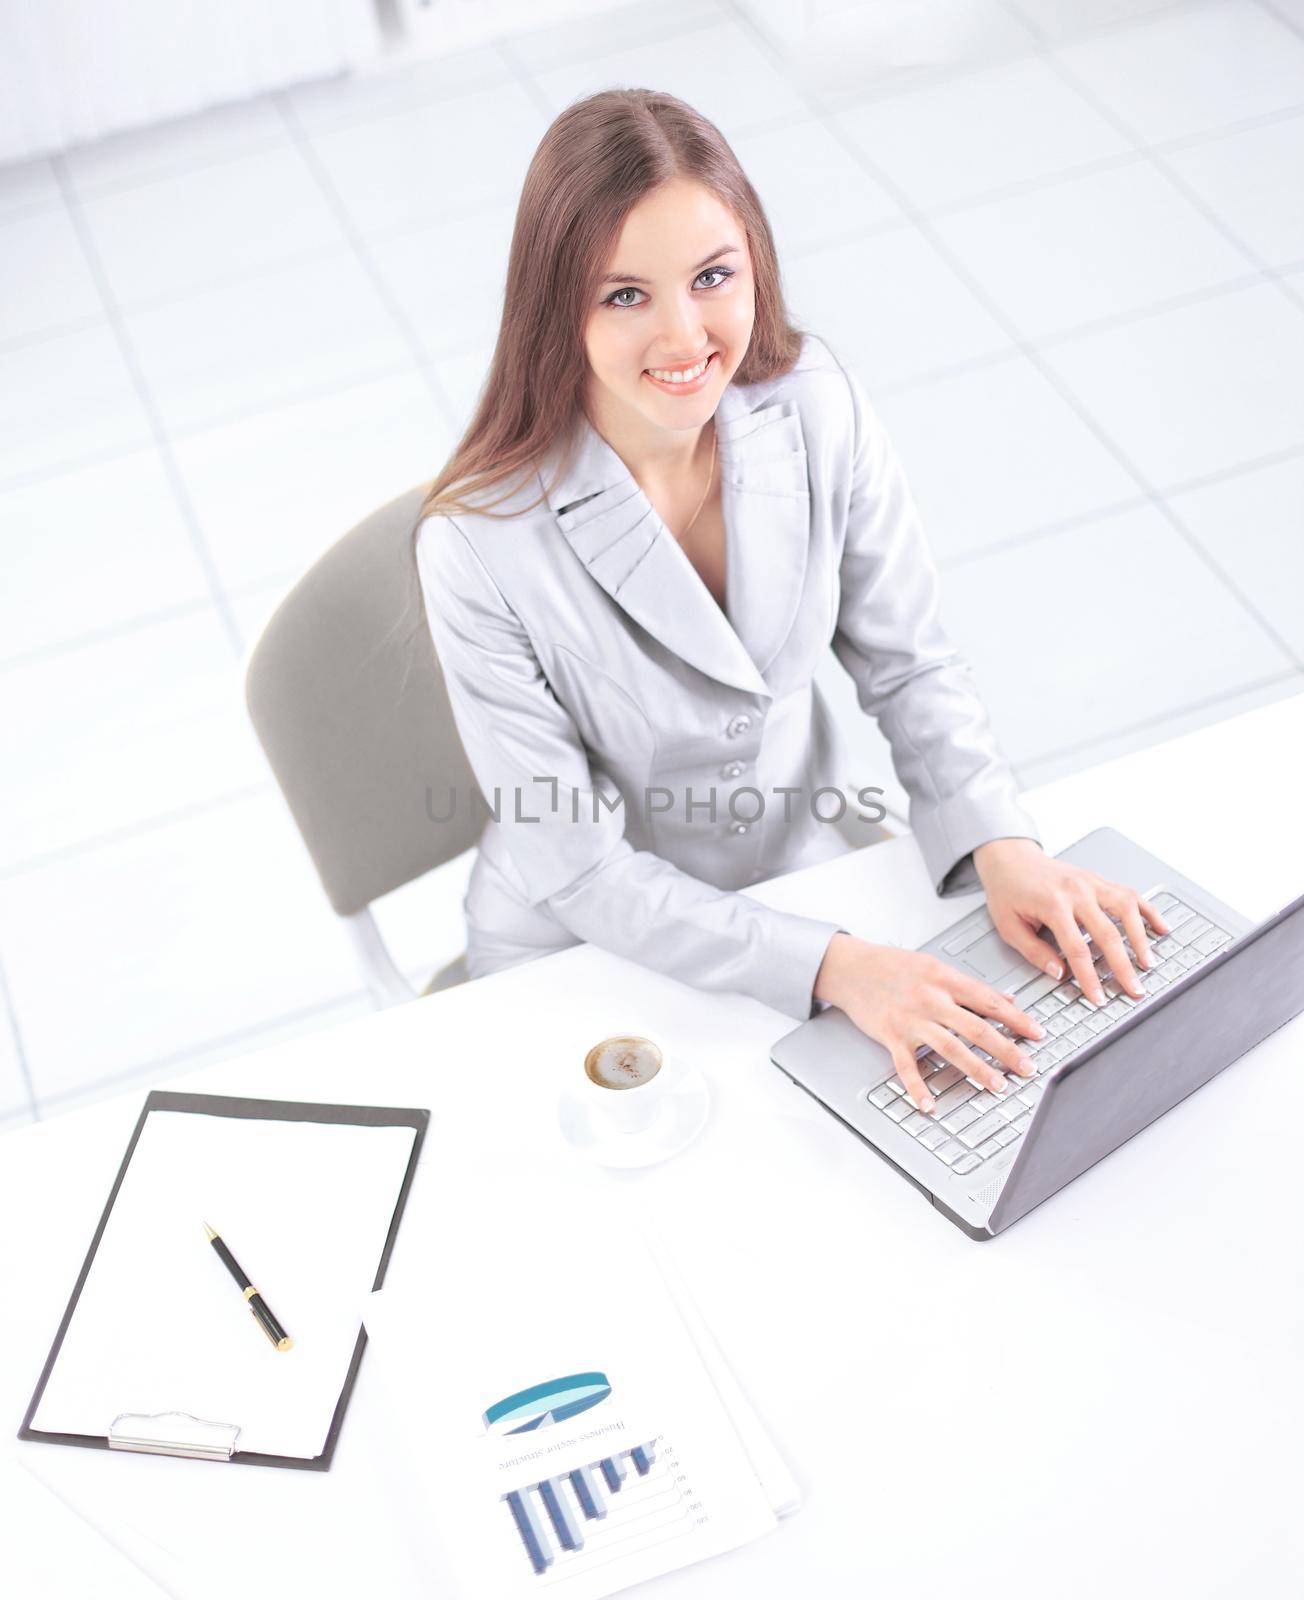 view from the top.business woman working on laptop.photo with copy space.